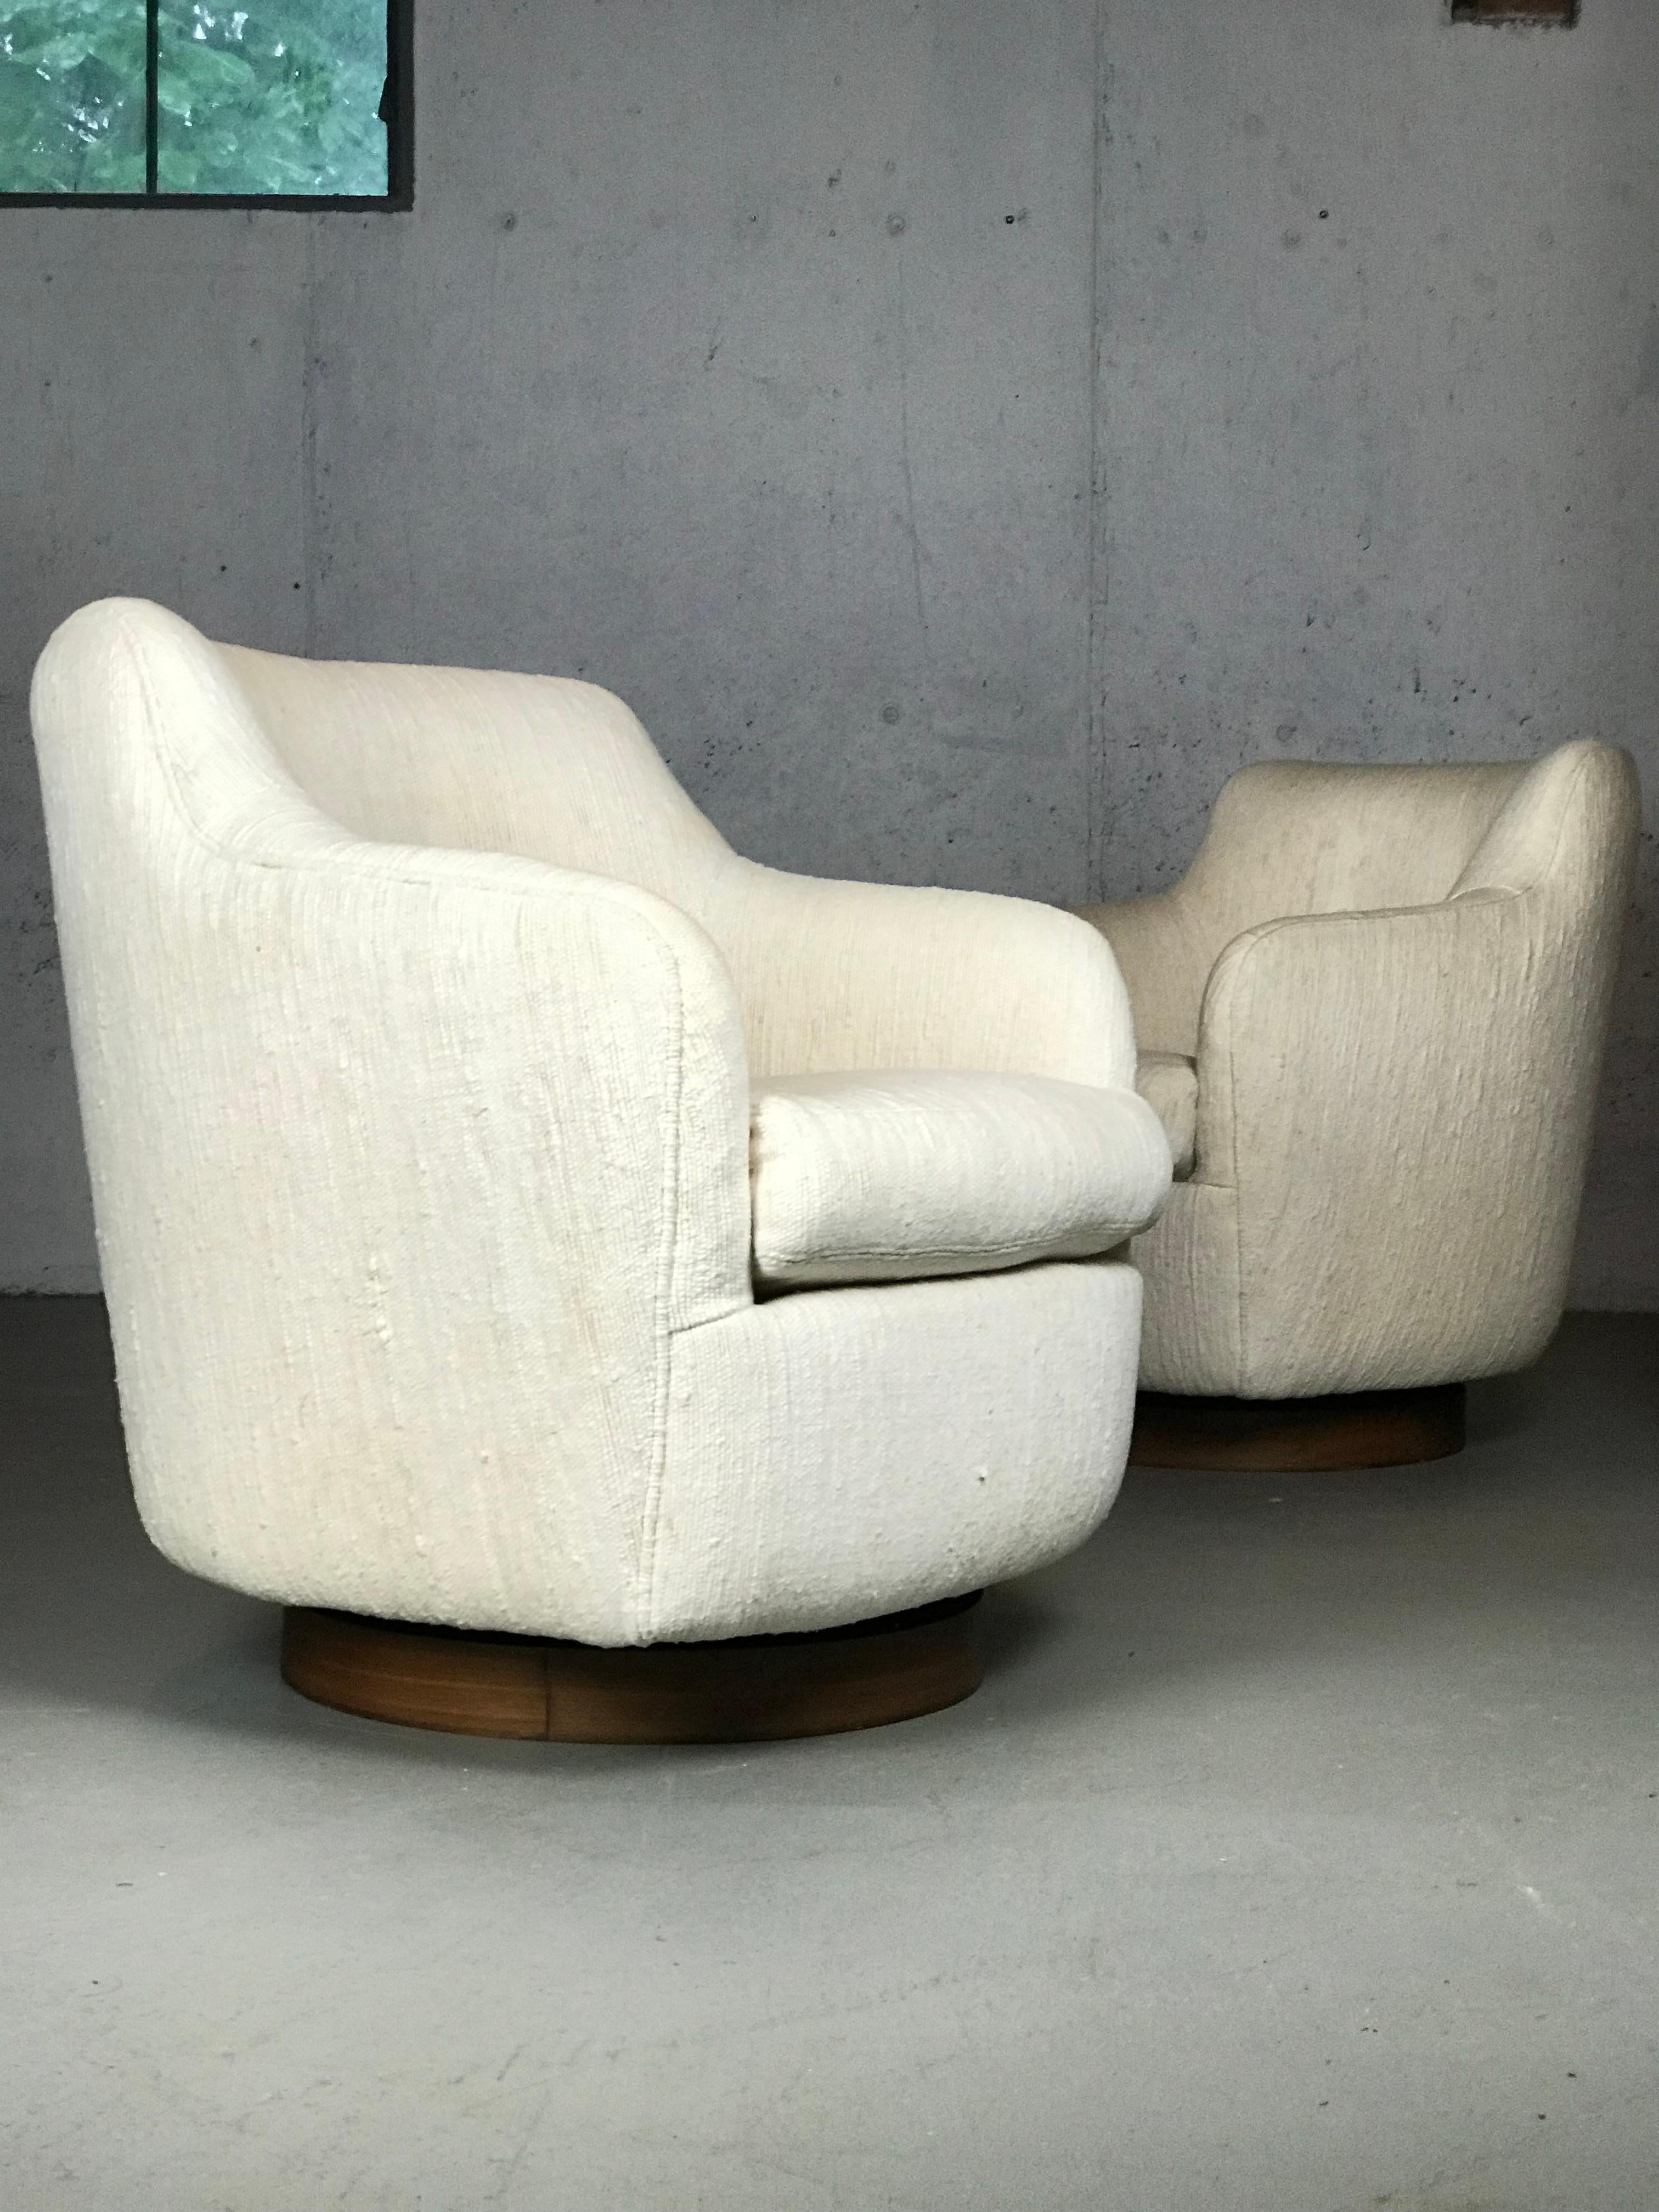 Lovely pair of lounge chairs designed by Milo Baughman for Thayer Coggin. Original nubby cream upholstery is in nice condition. Some stains under the seat cushion (not showing). Walnut bases.
Measures: 32 deep x 28 wide x 30.75 tall. 17 inch seat